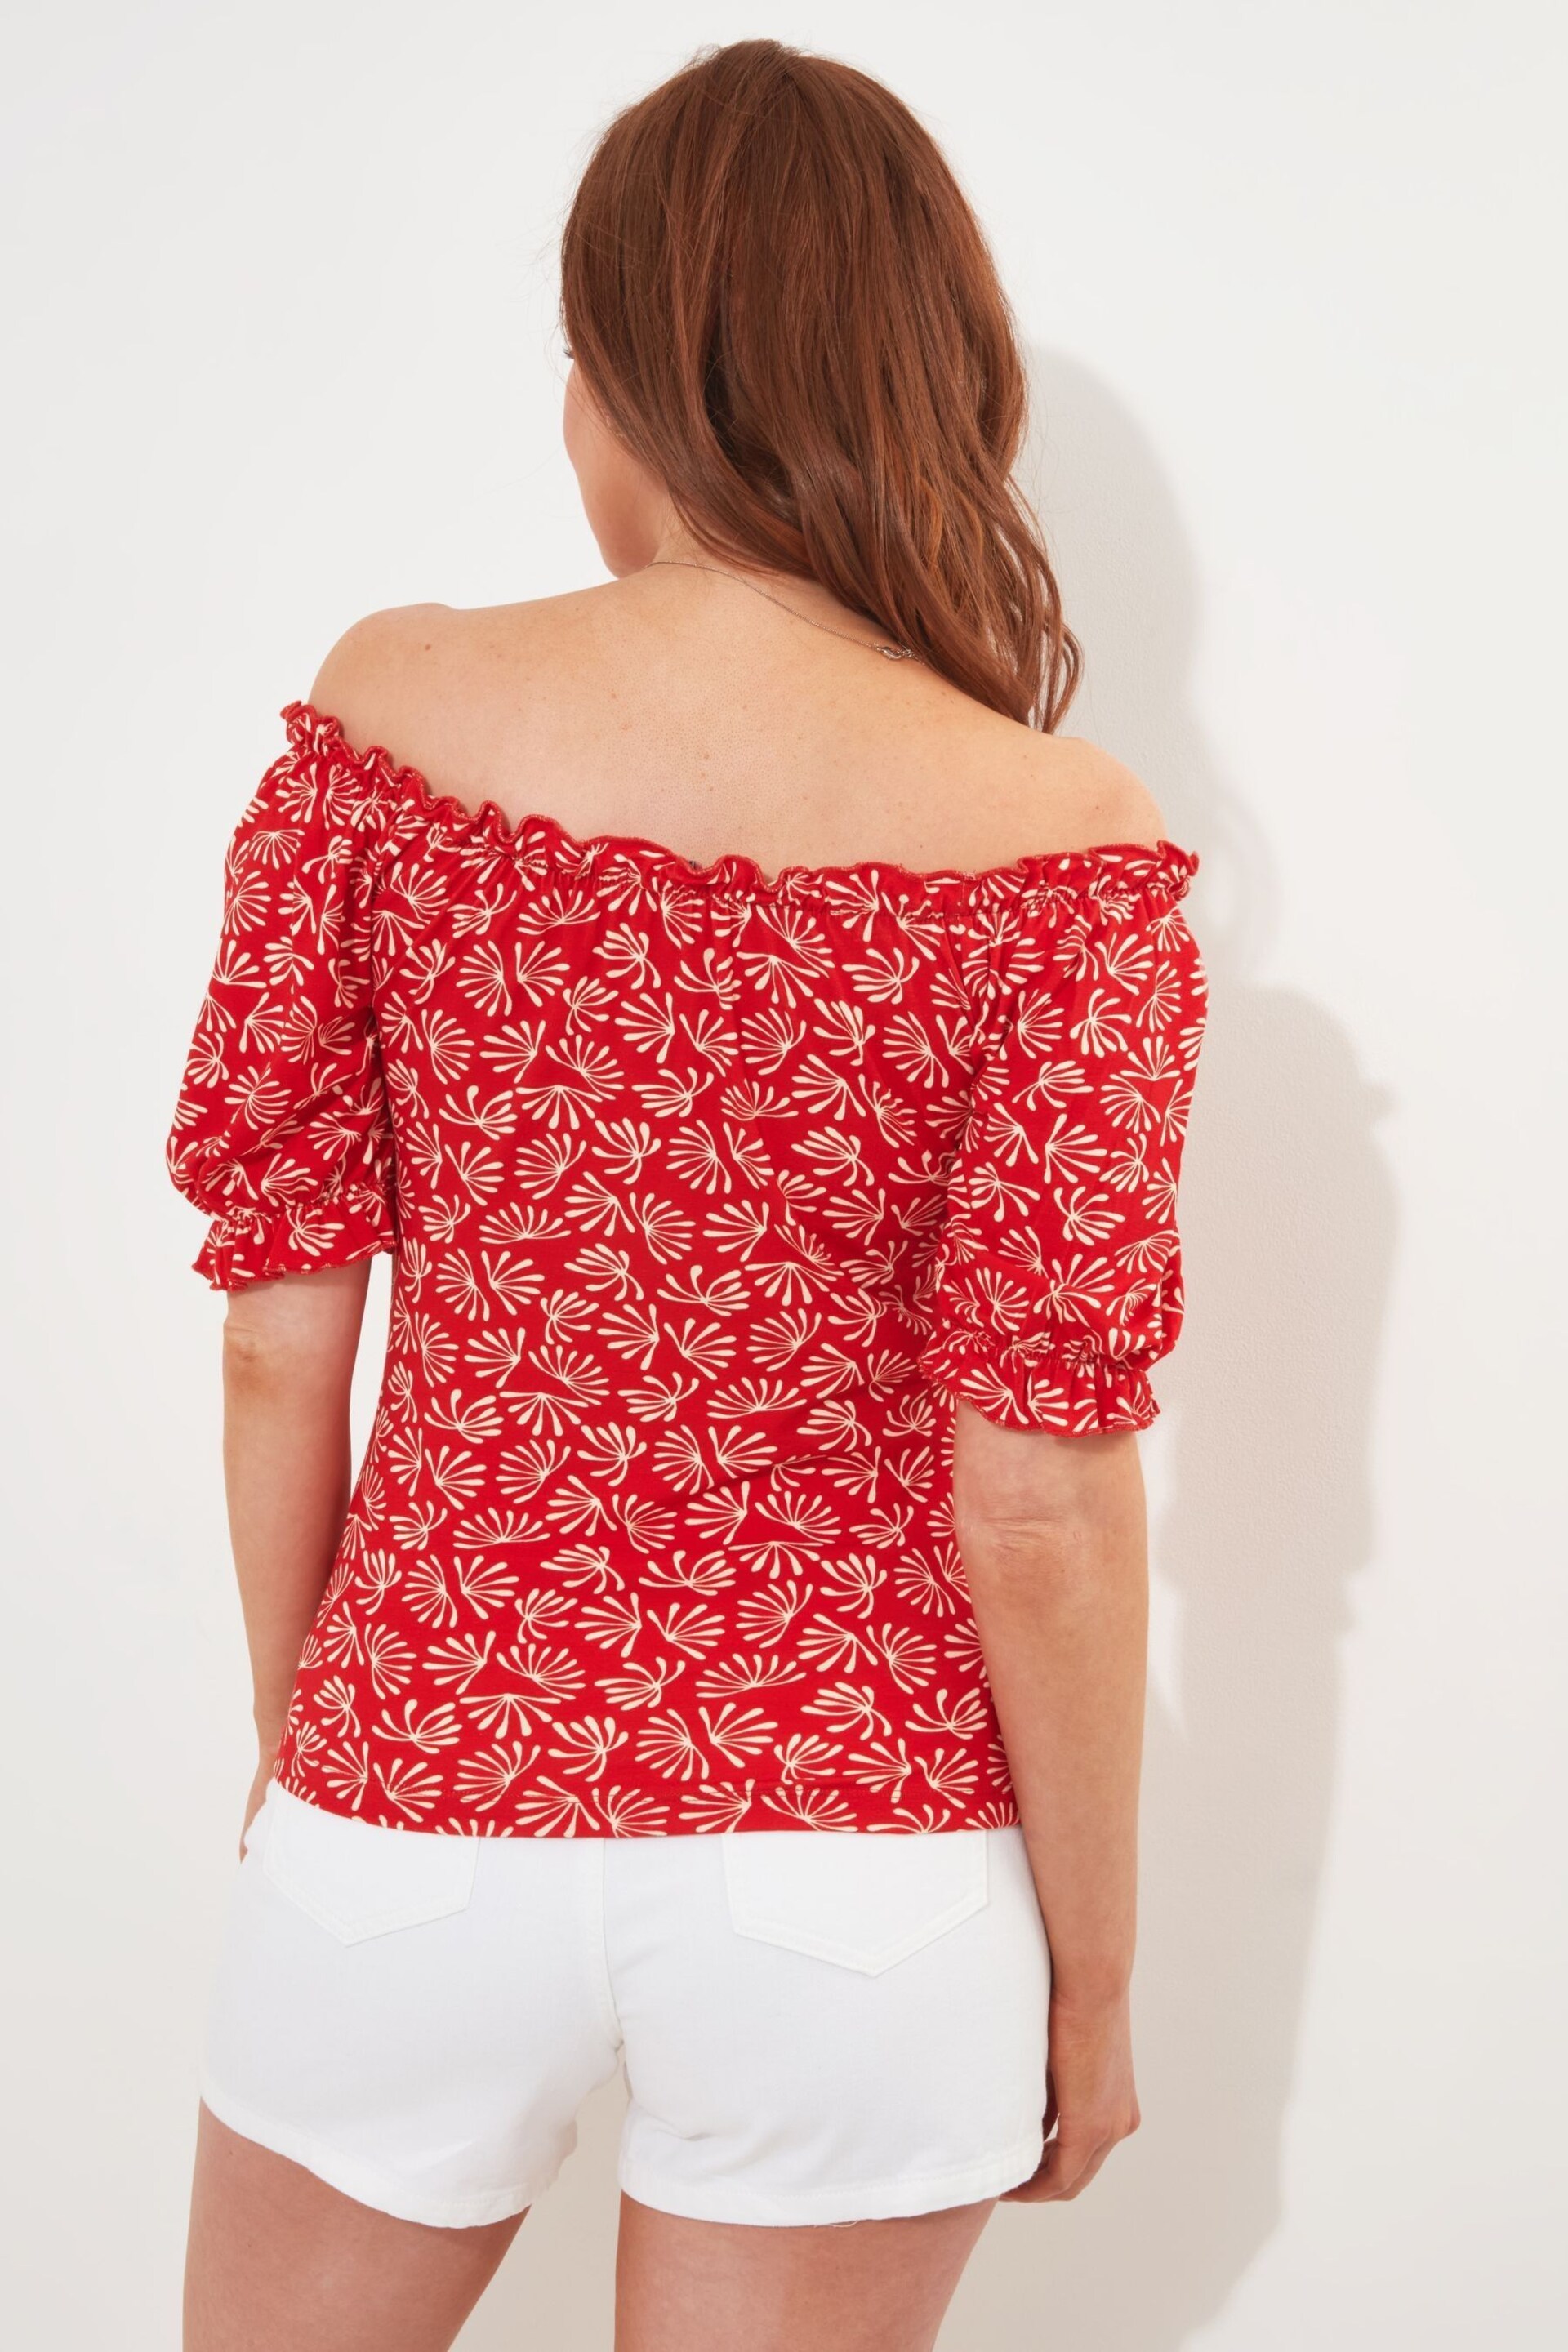 Joe Browns Red Relaxed Fit Printed Jersey Top - Image 3 of 5